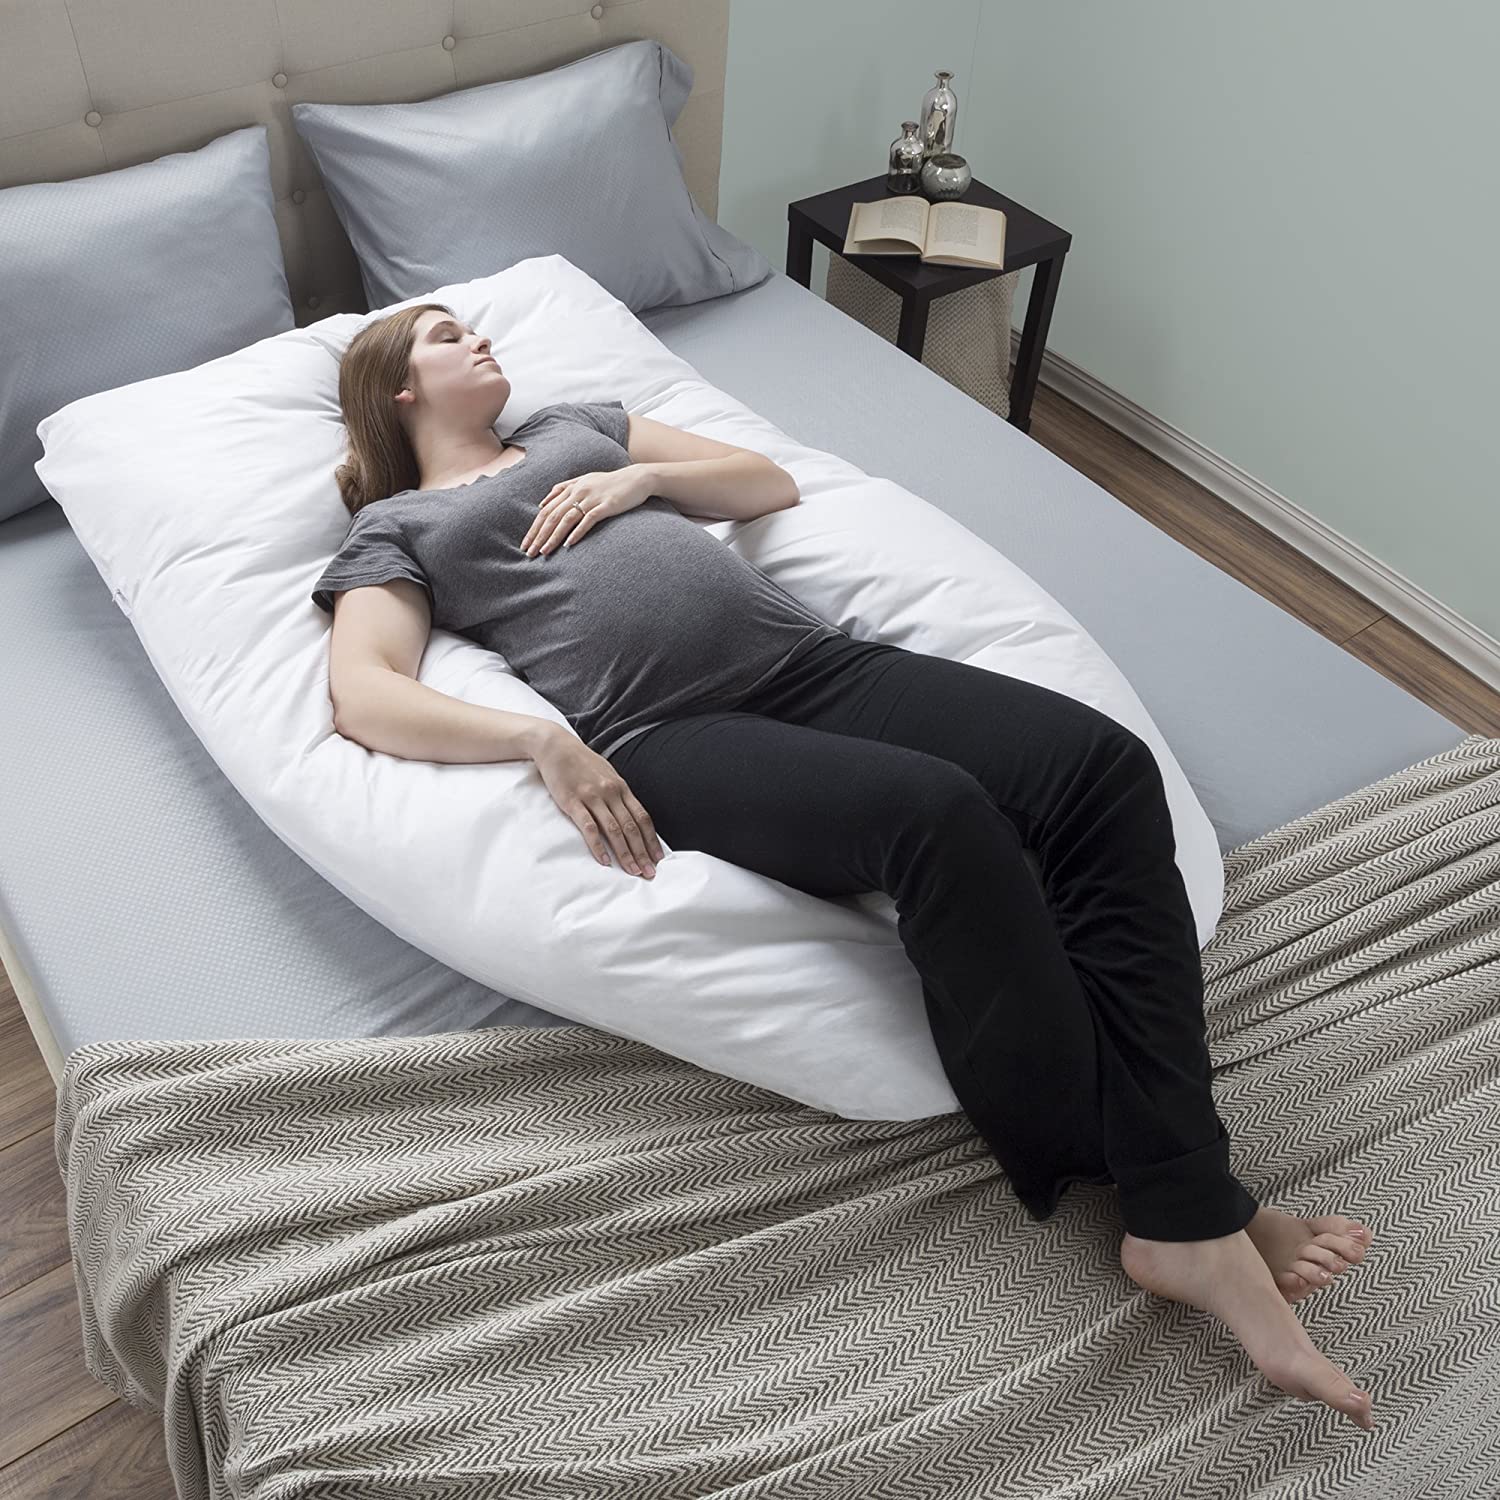 Top 11 Best Full Body Pregnancy Pillow Guide 2020 Which One To Buy